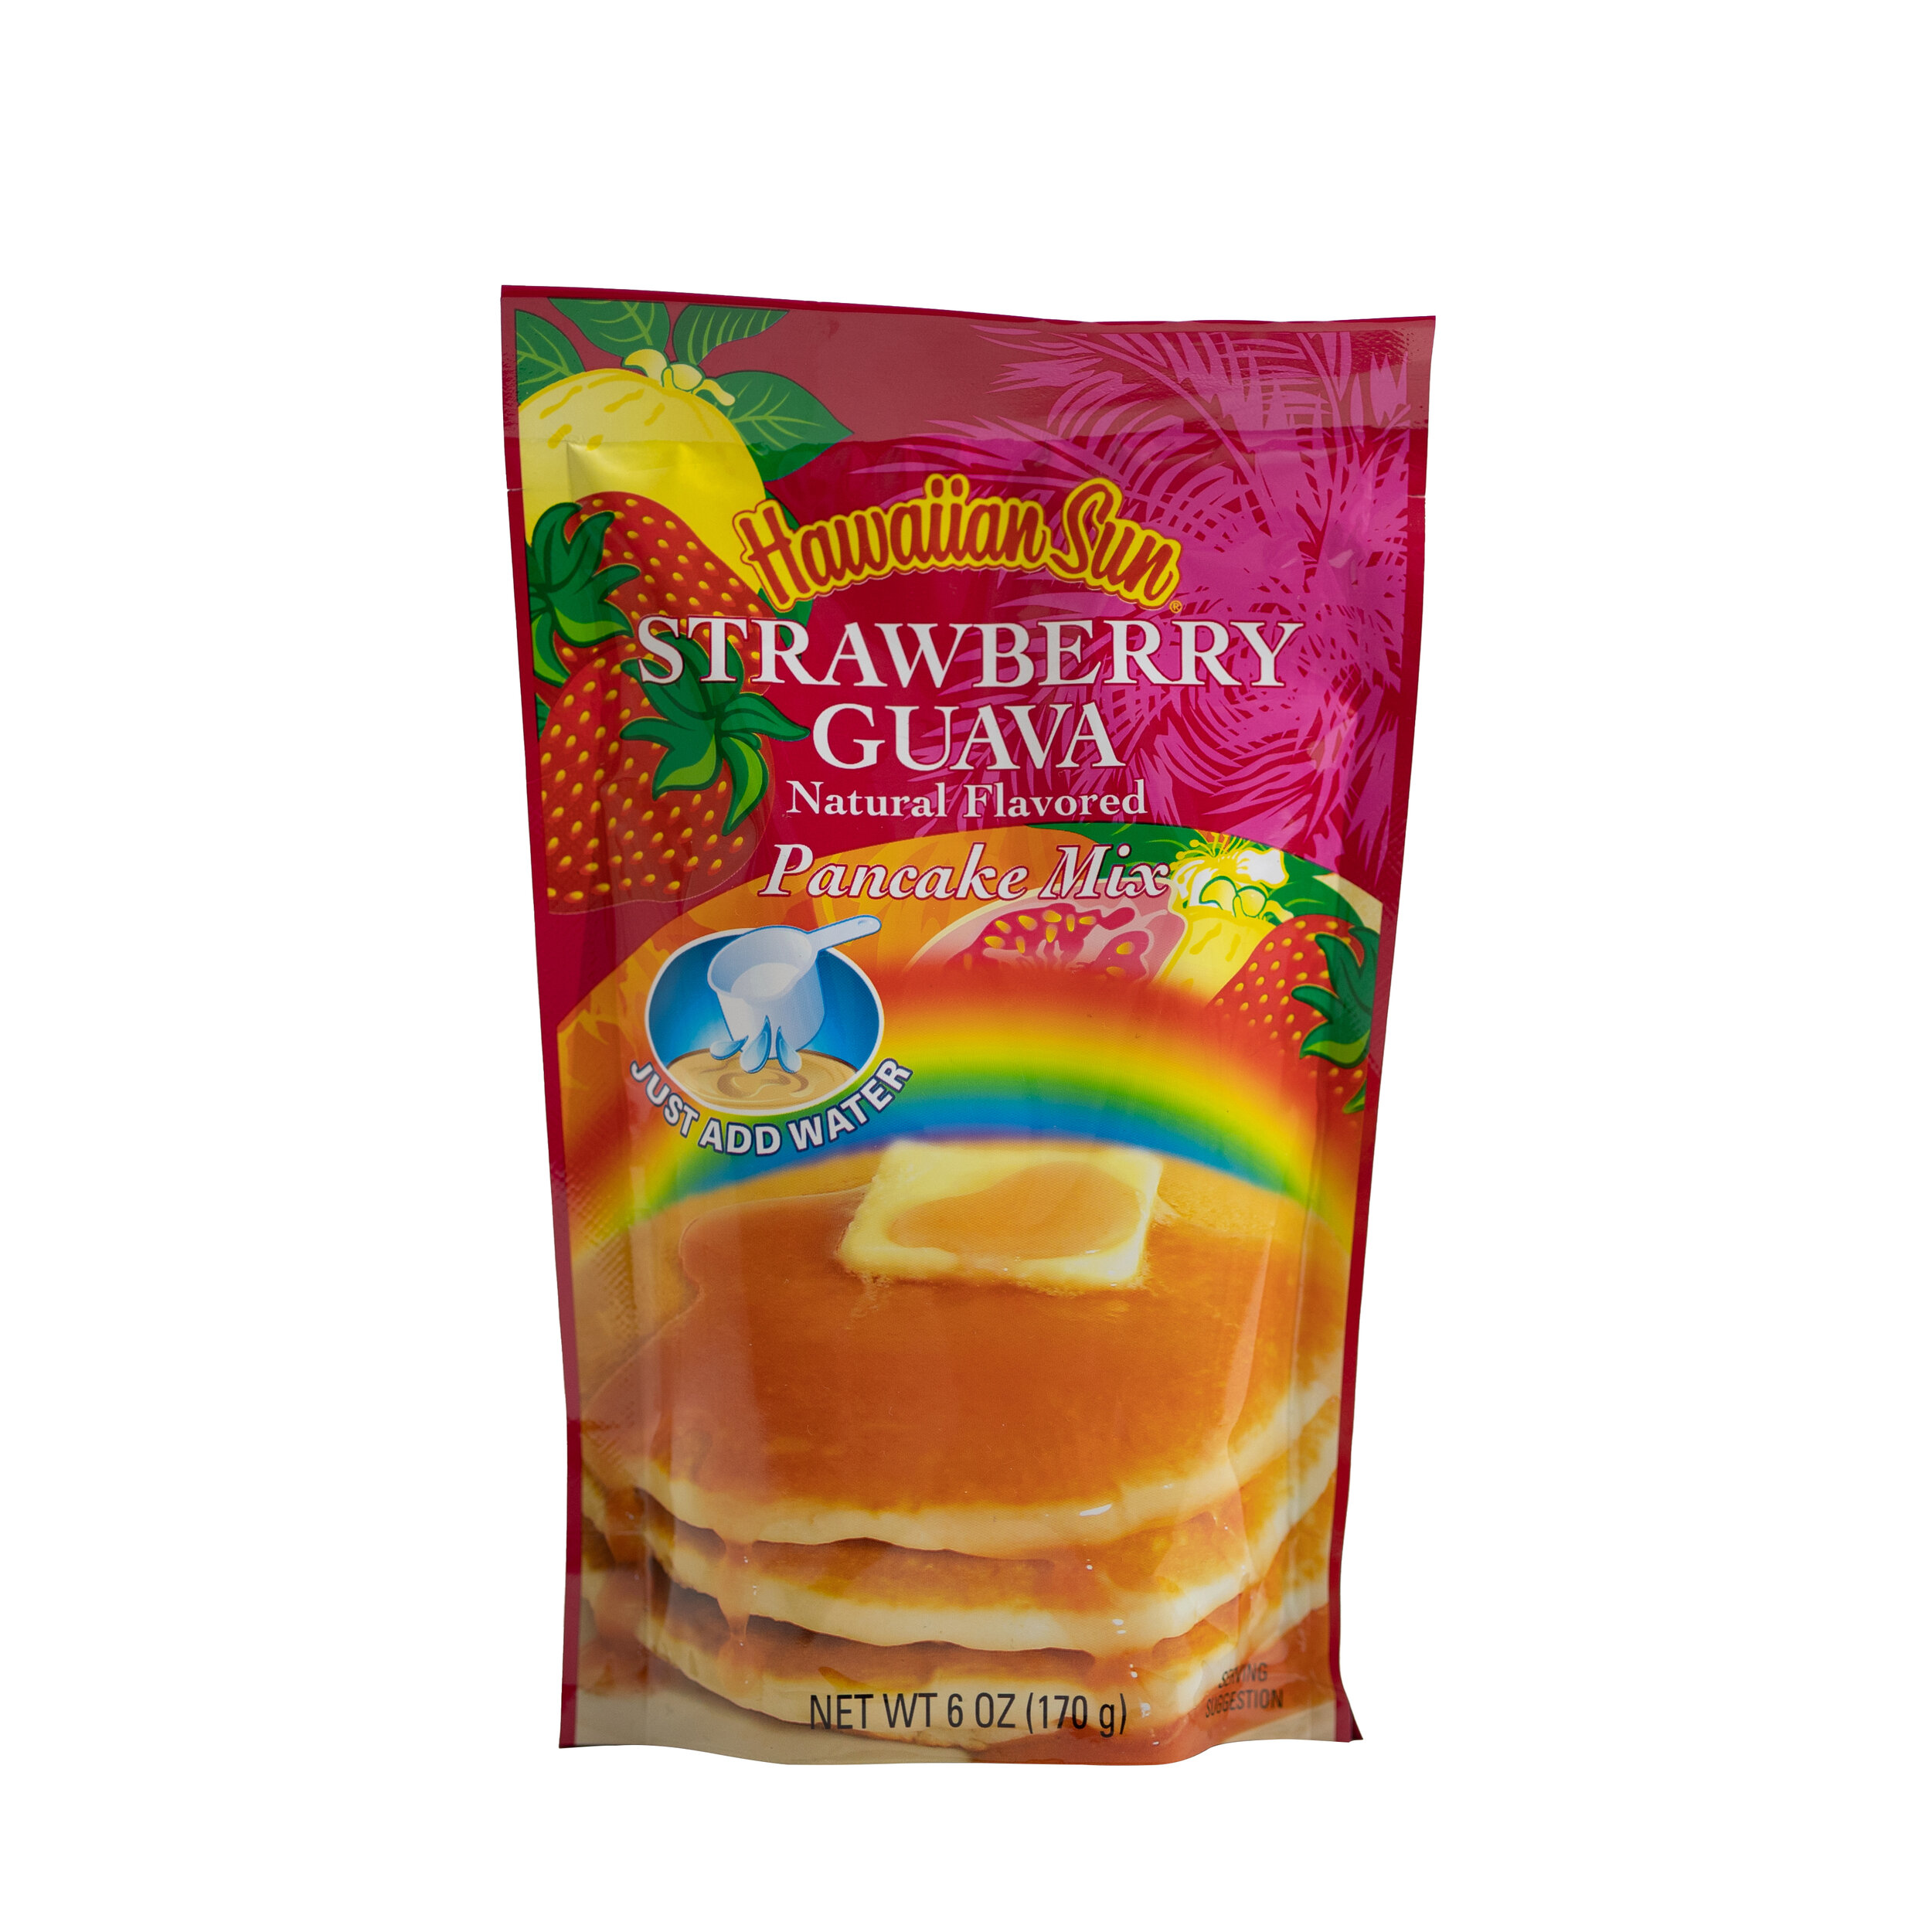 Strawberry Guava Flavored Pancake Mix